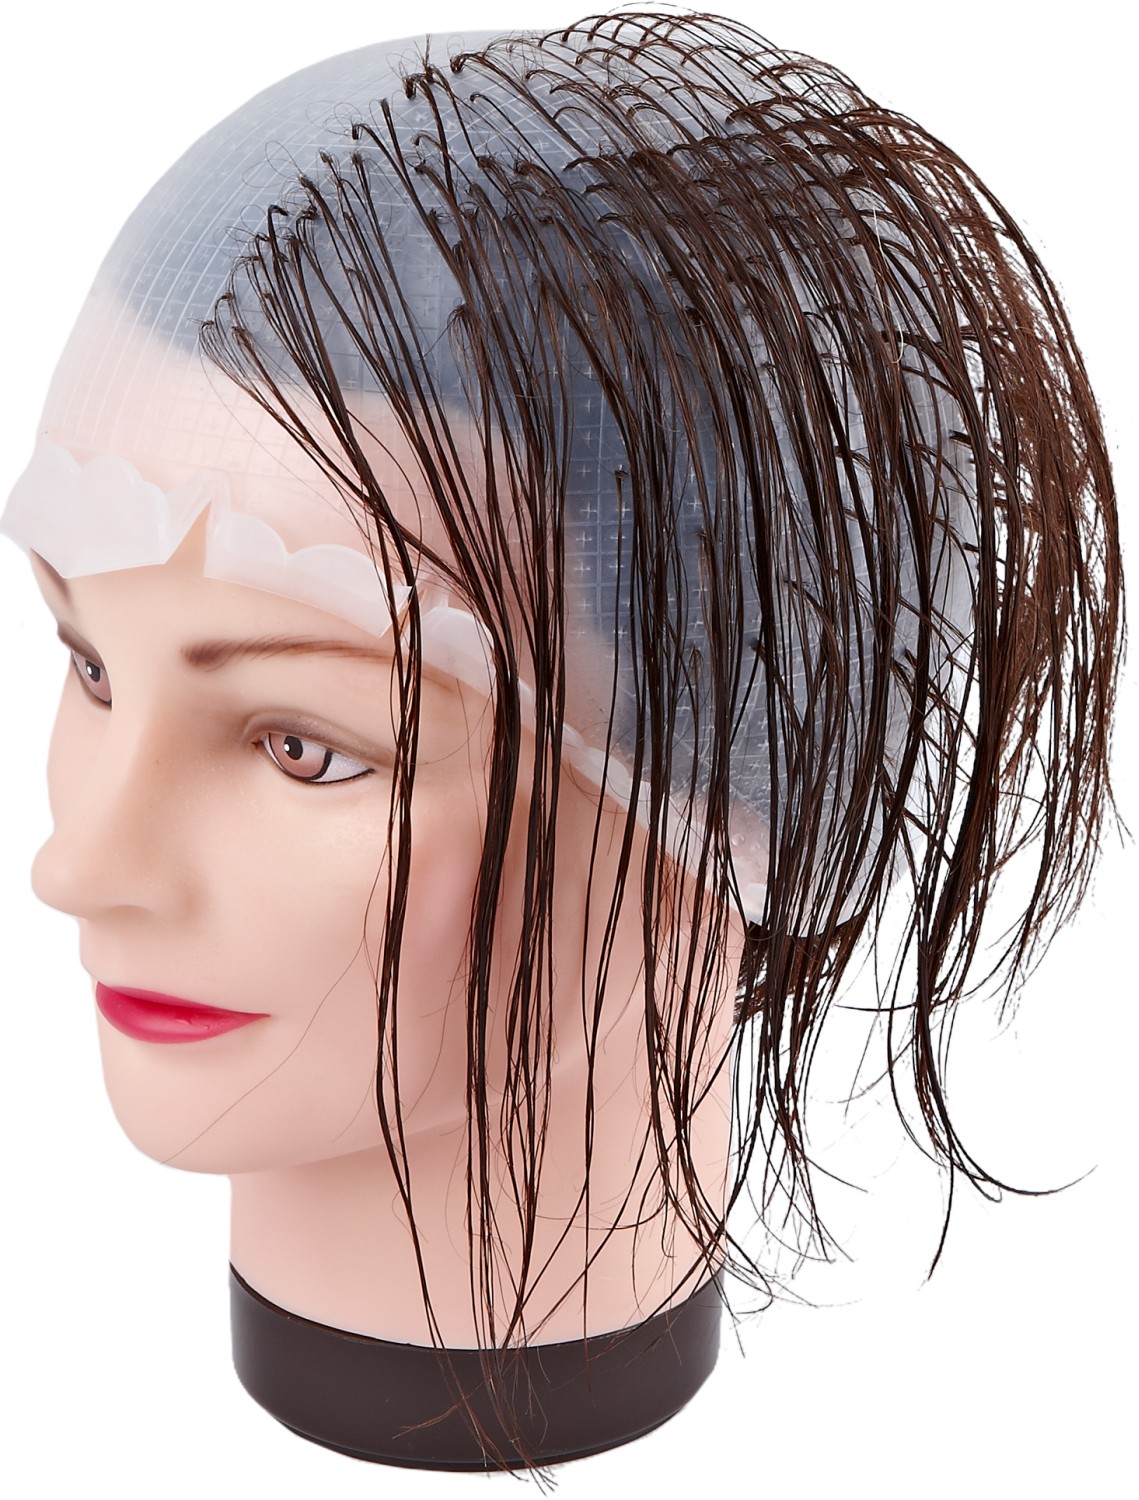 Fripac-Medis Salon-Stylist Streaking Cap for Highlighting Large Large size  - reusable - silicone rubber 